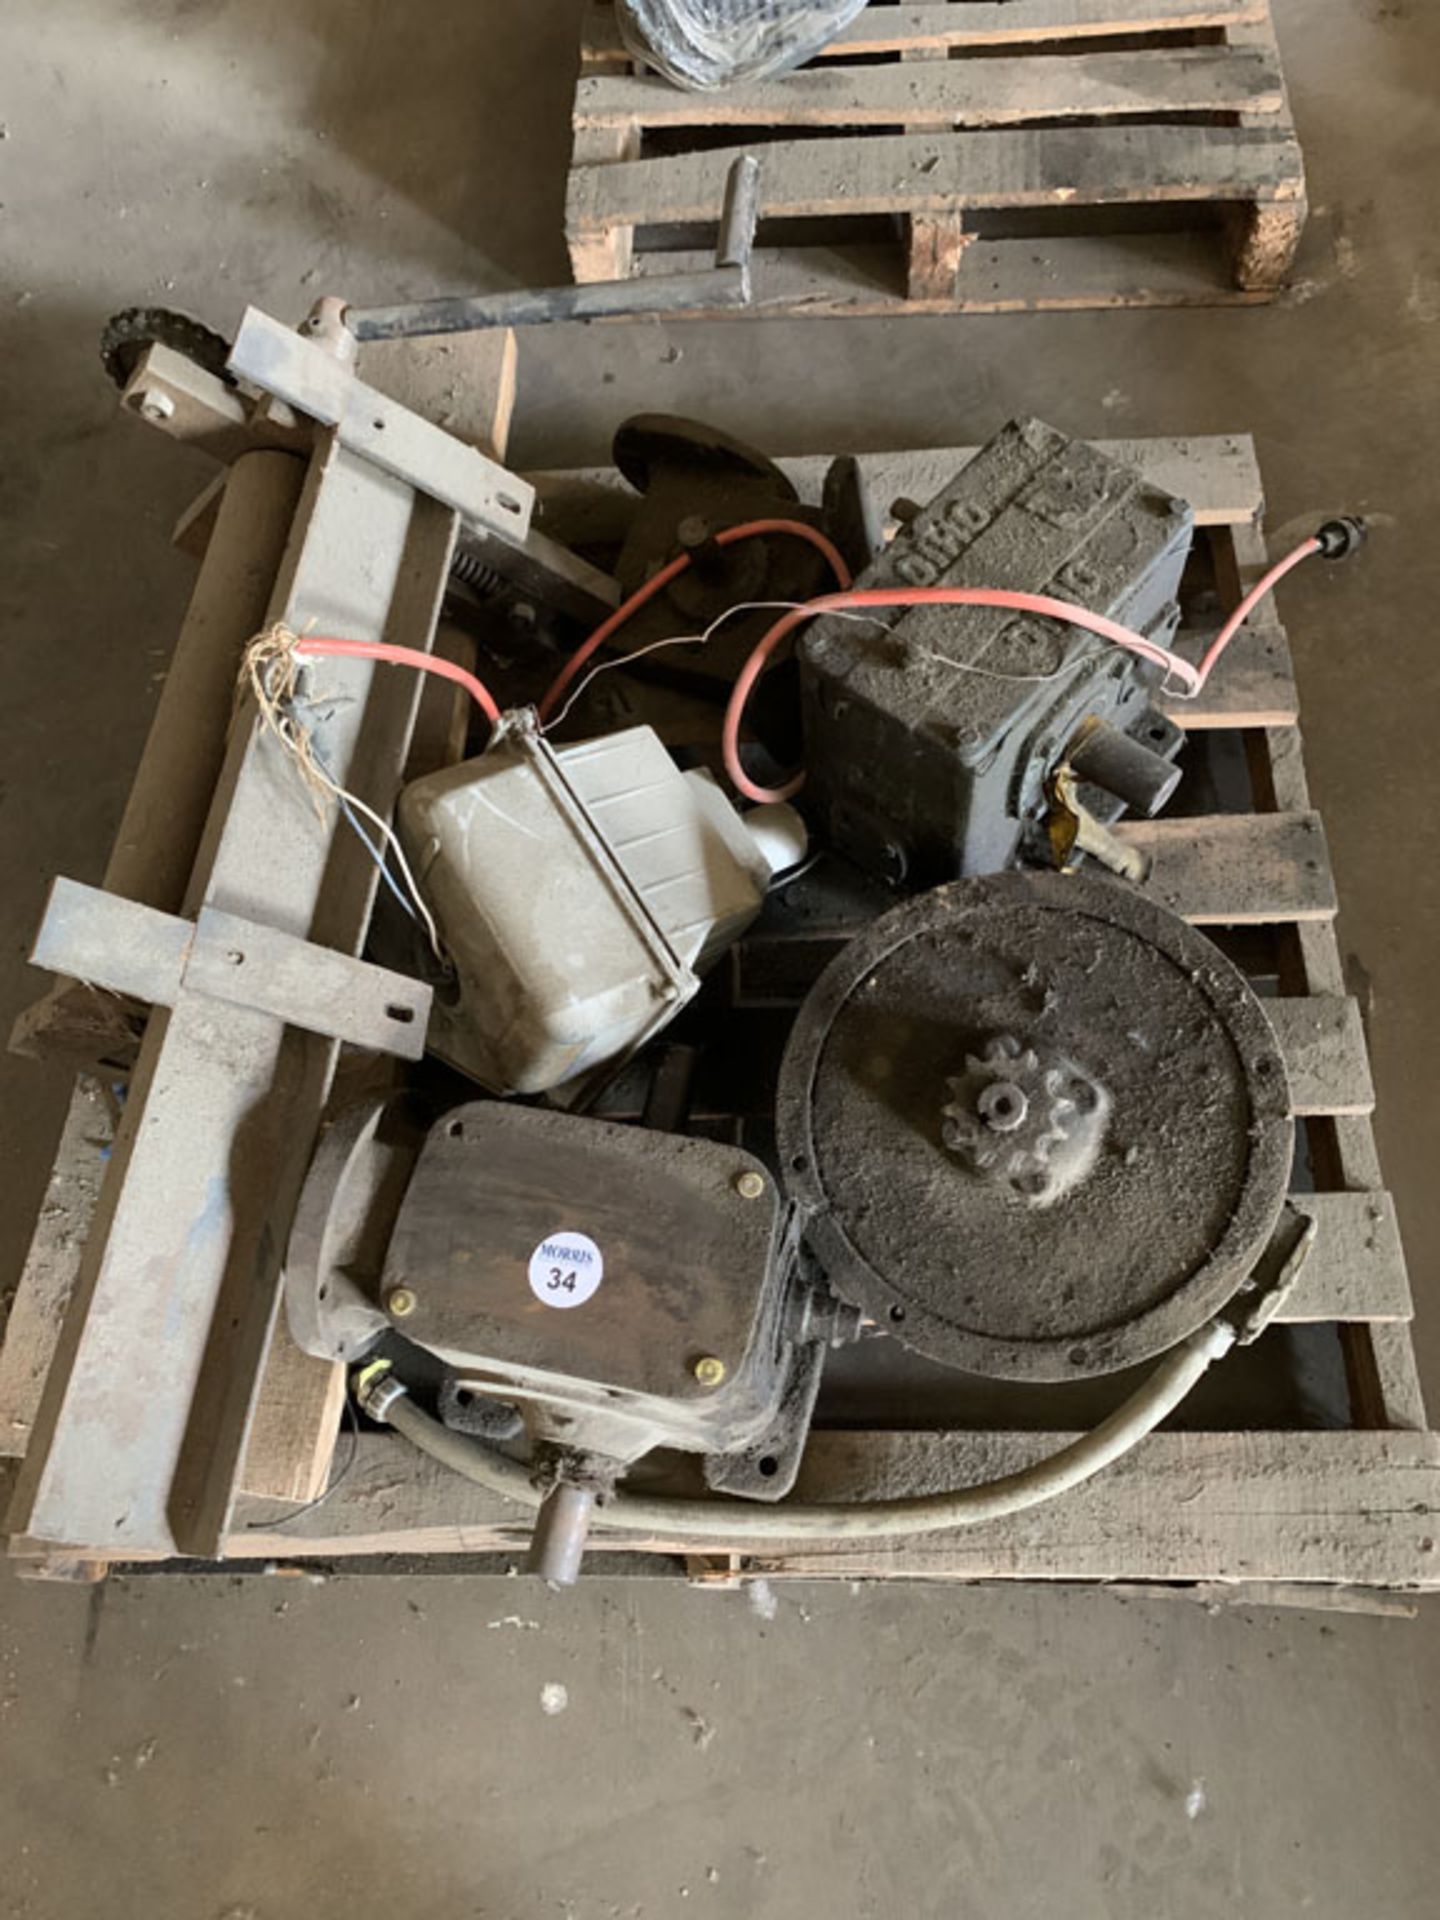 Gear Boxes and metal roller